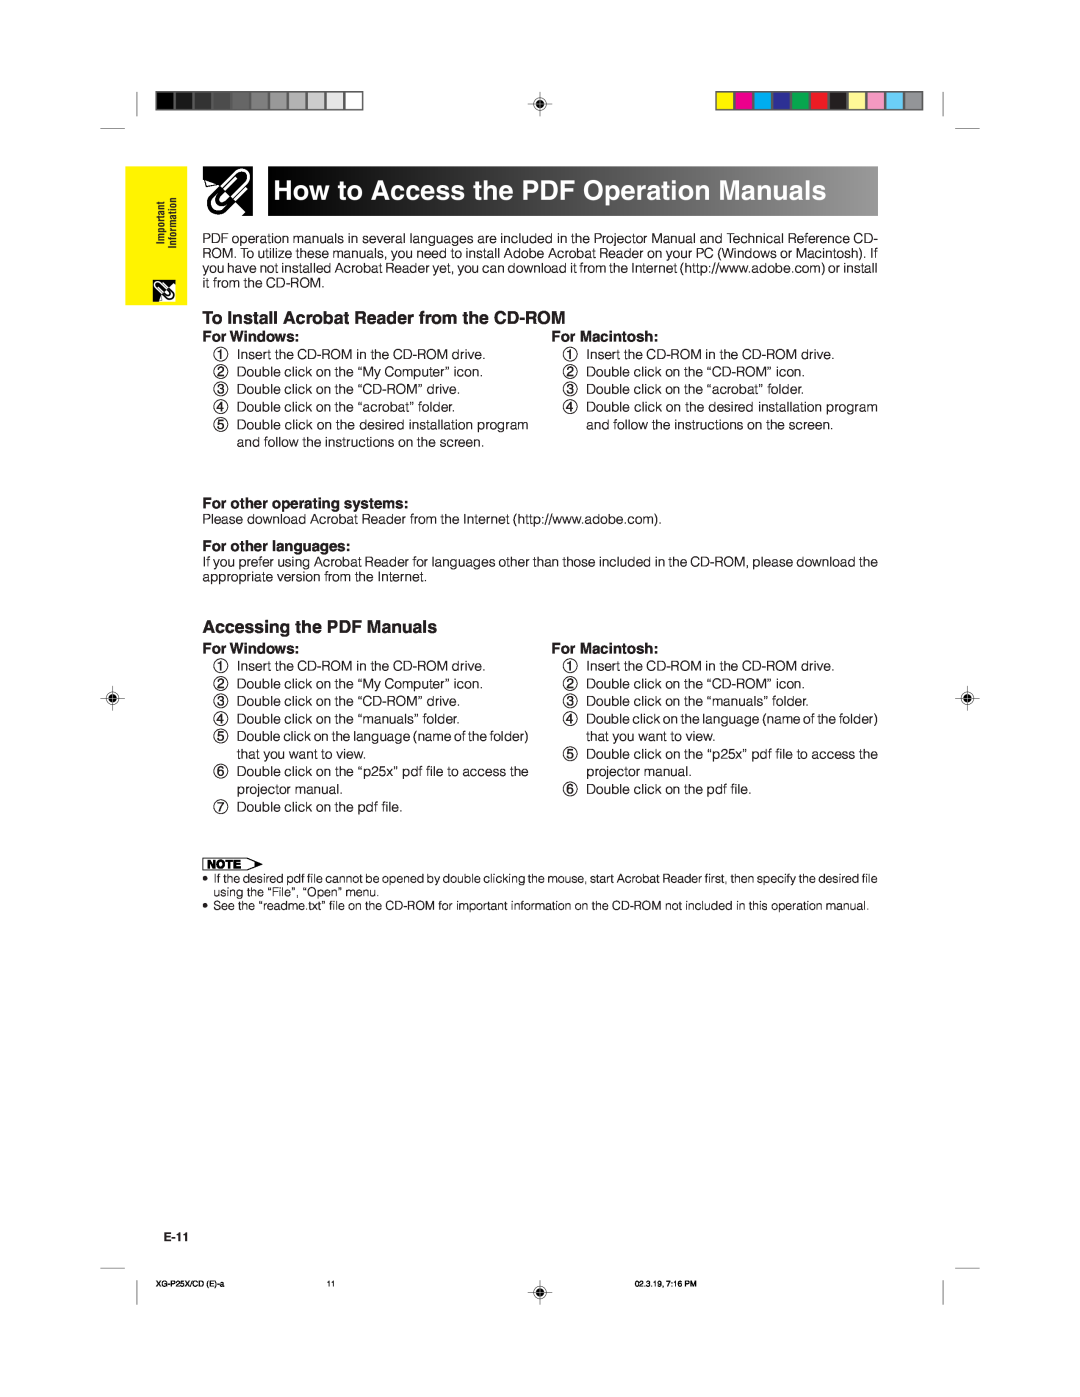 Sharp XG-P25X How to Access the PDF Operation Manuals, To Install Acrobat Reader from the CD-ROM, For Windows 